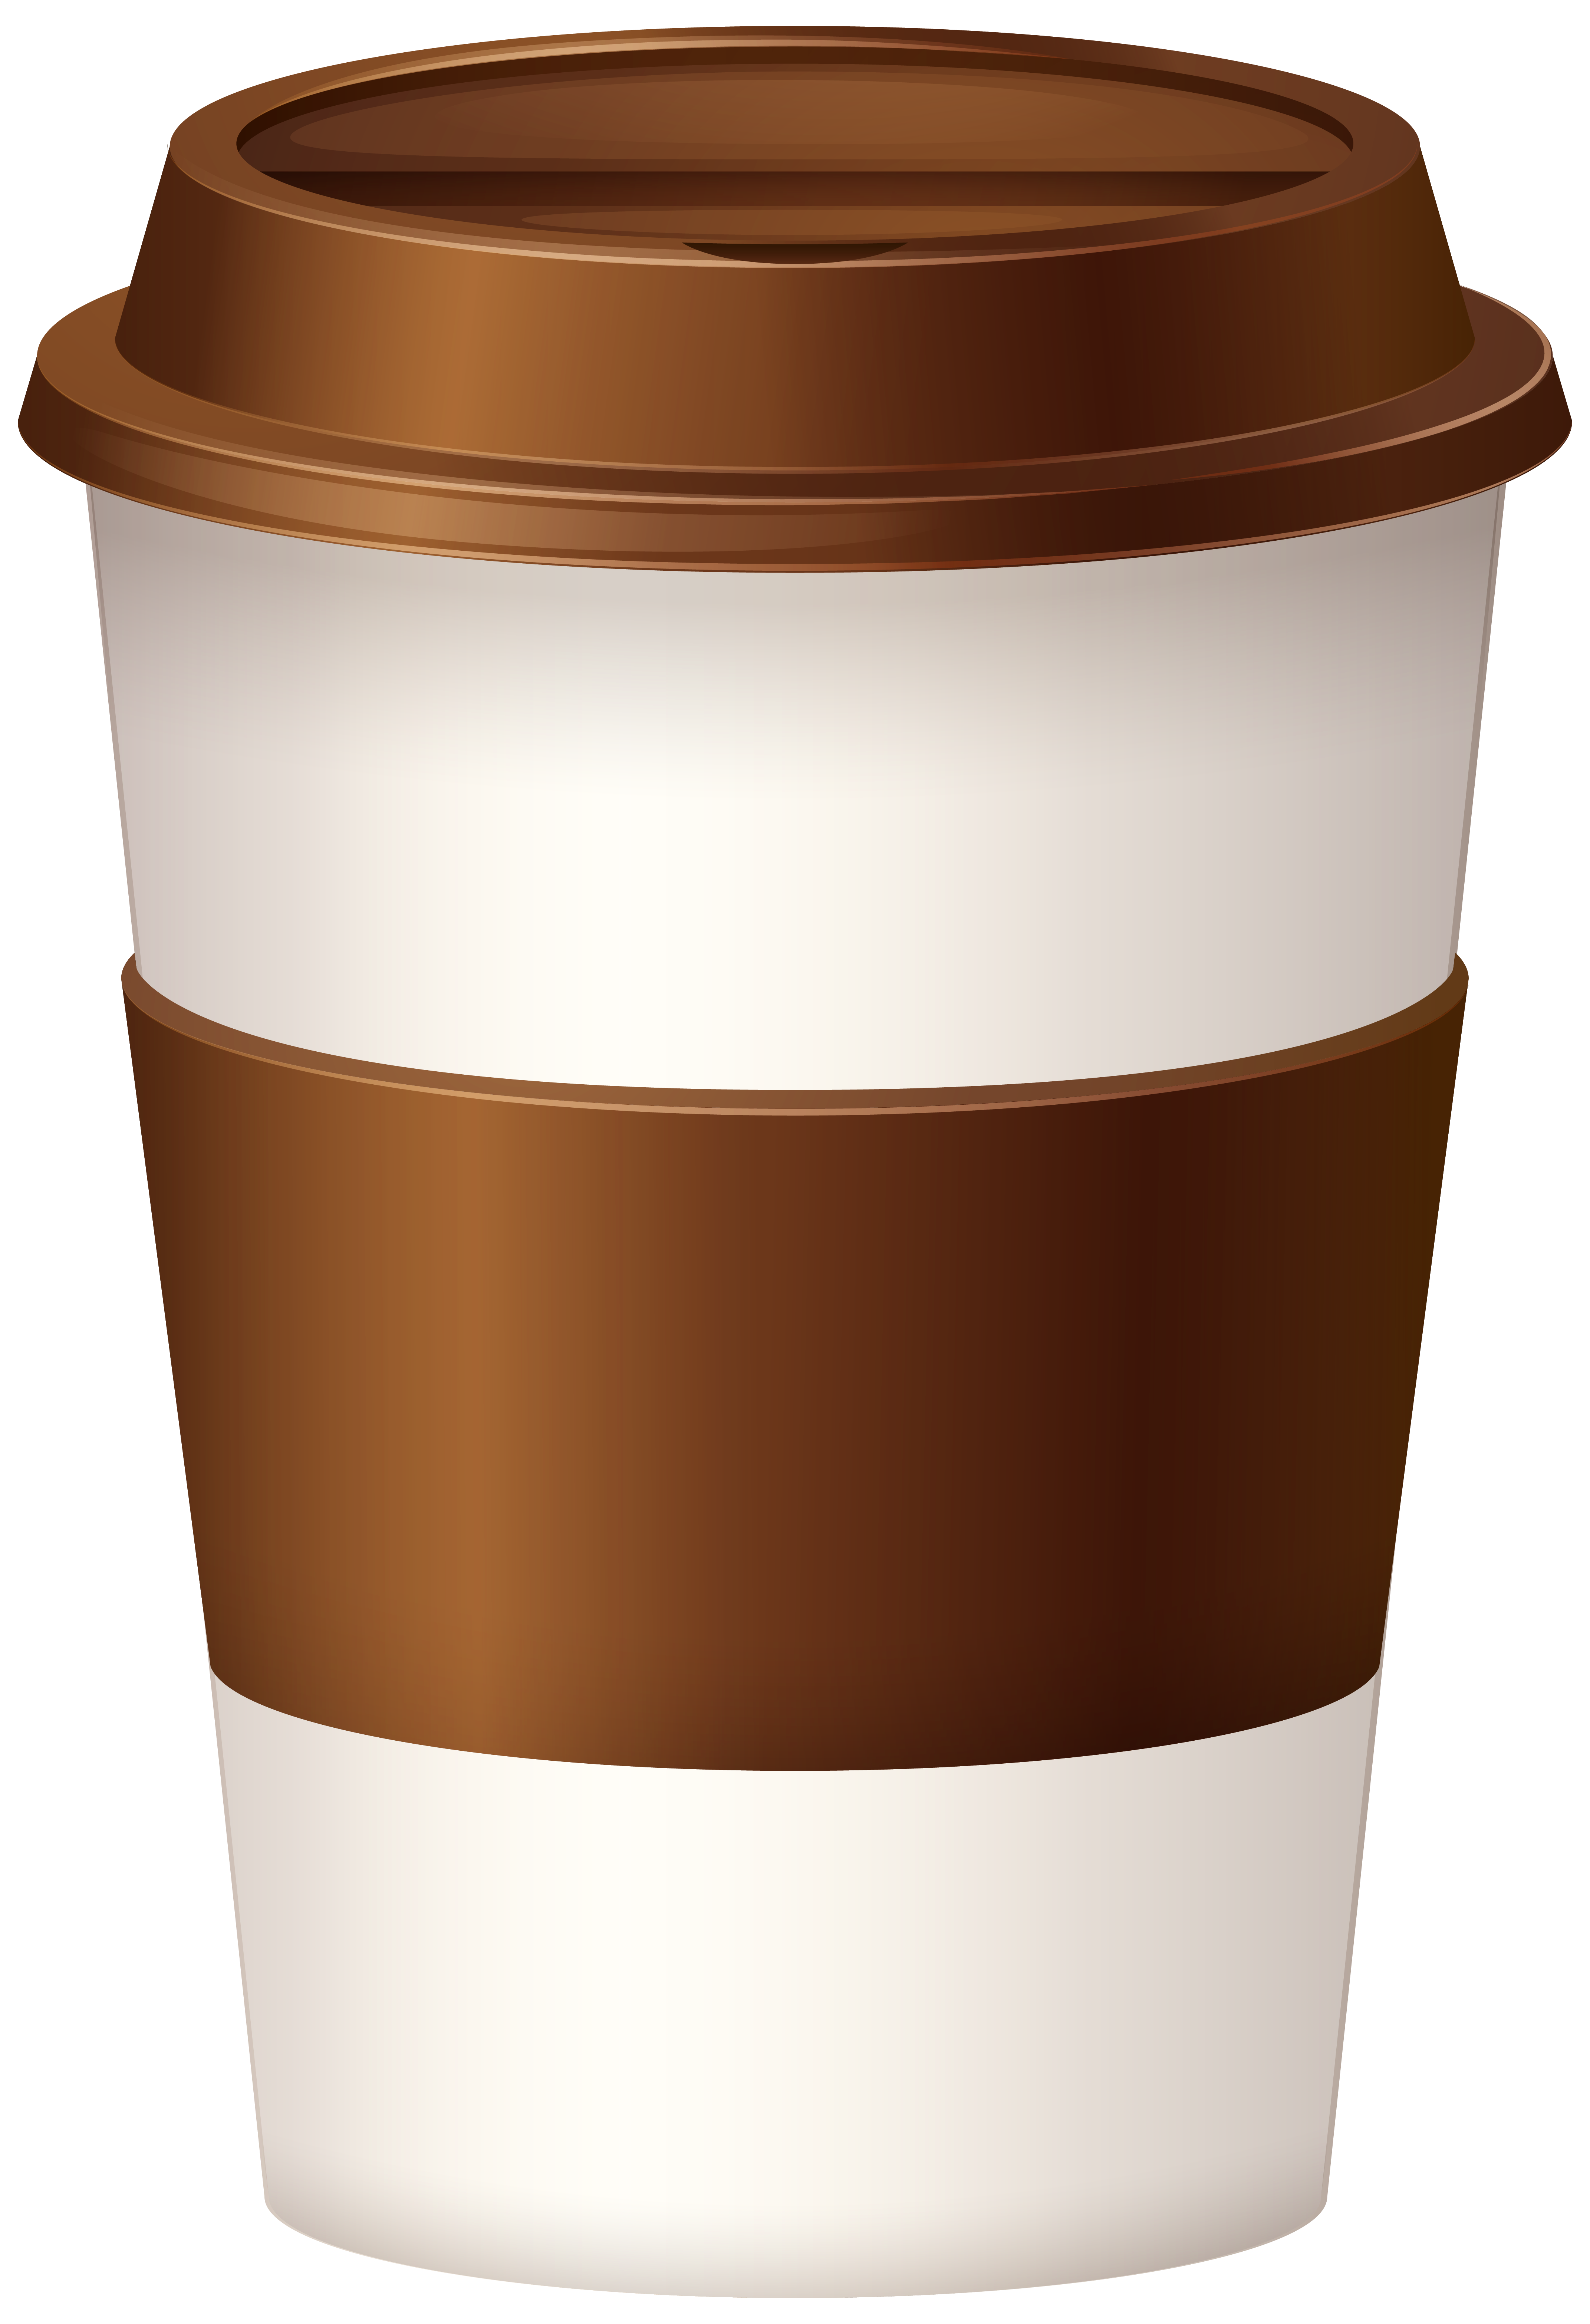 Hot Coffee Cup PNG Clipart Image | Gallery Yopriceville ...